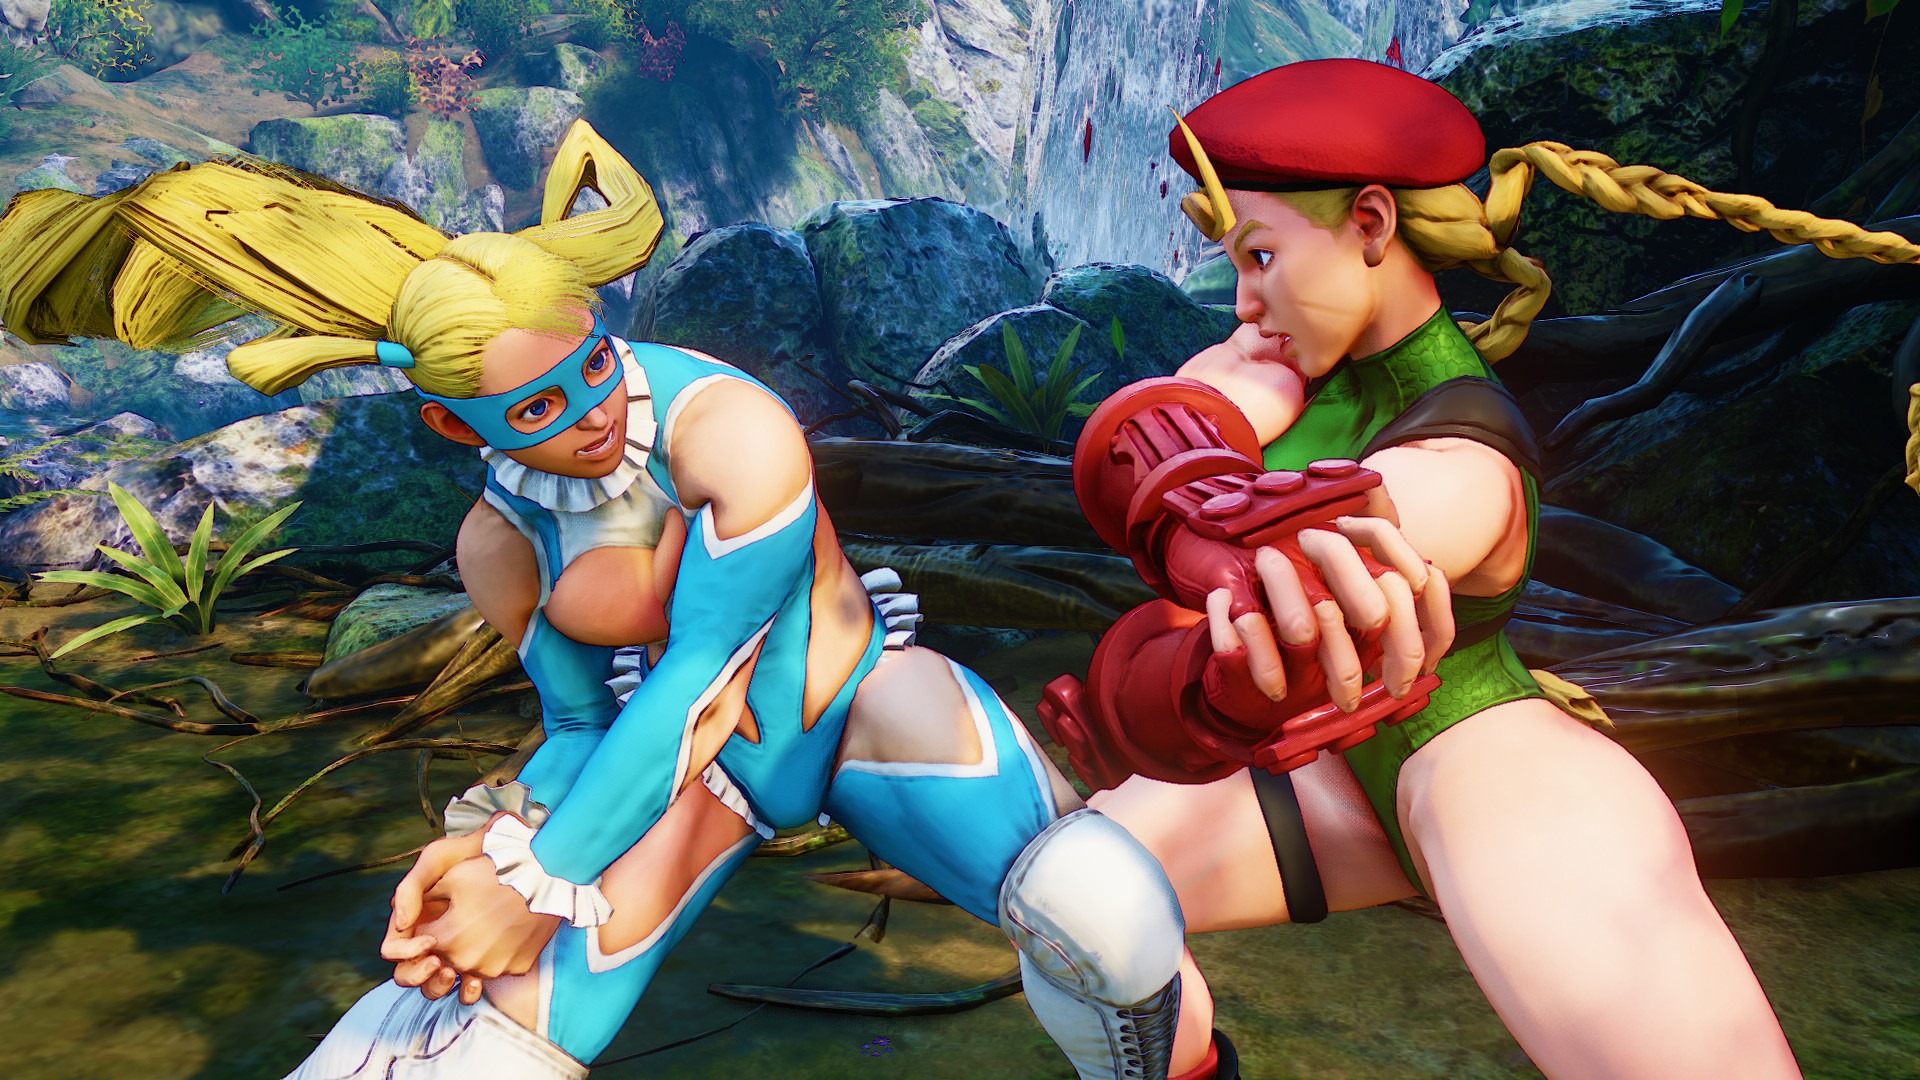 Cammy in pants lol  Street fighter characters, Cammy street